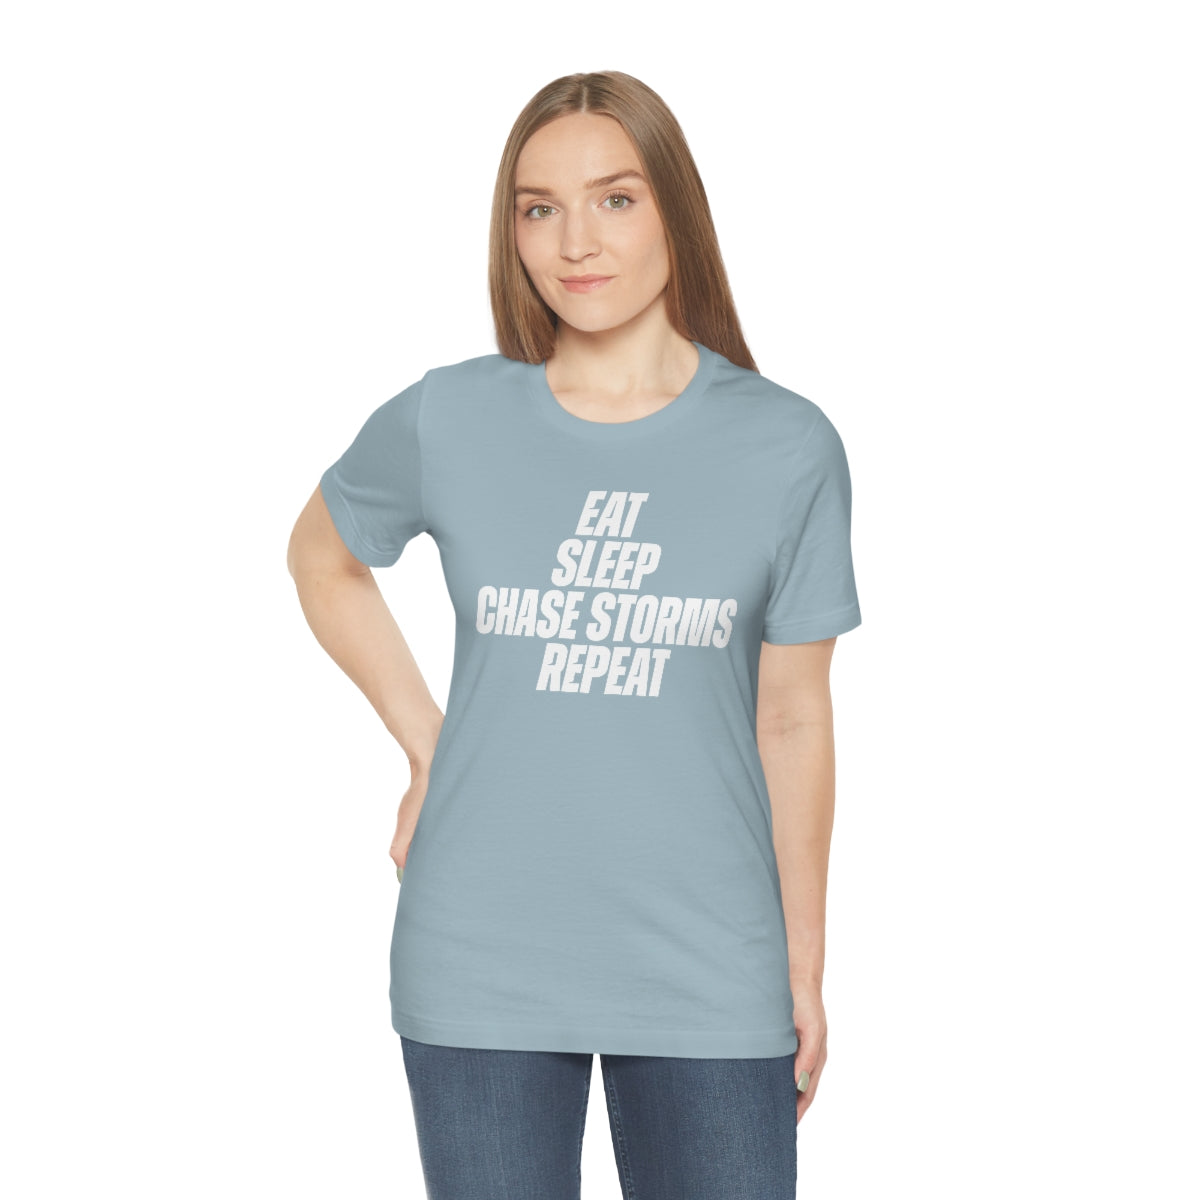 Eat, Sleep, Chase Storms Repeat Tee 